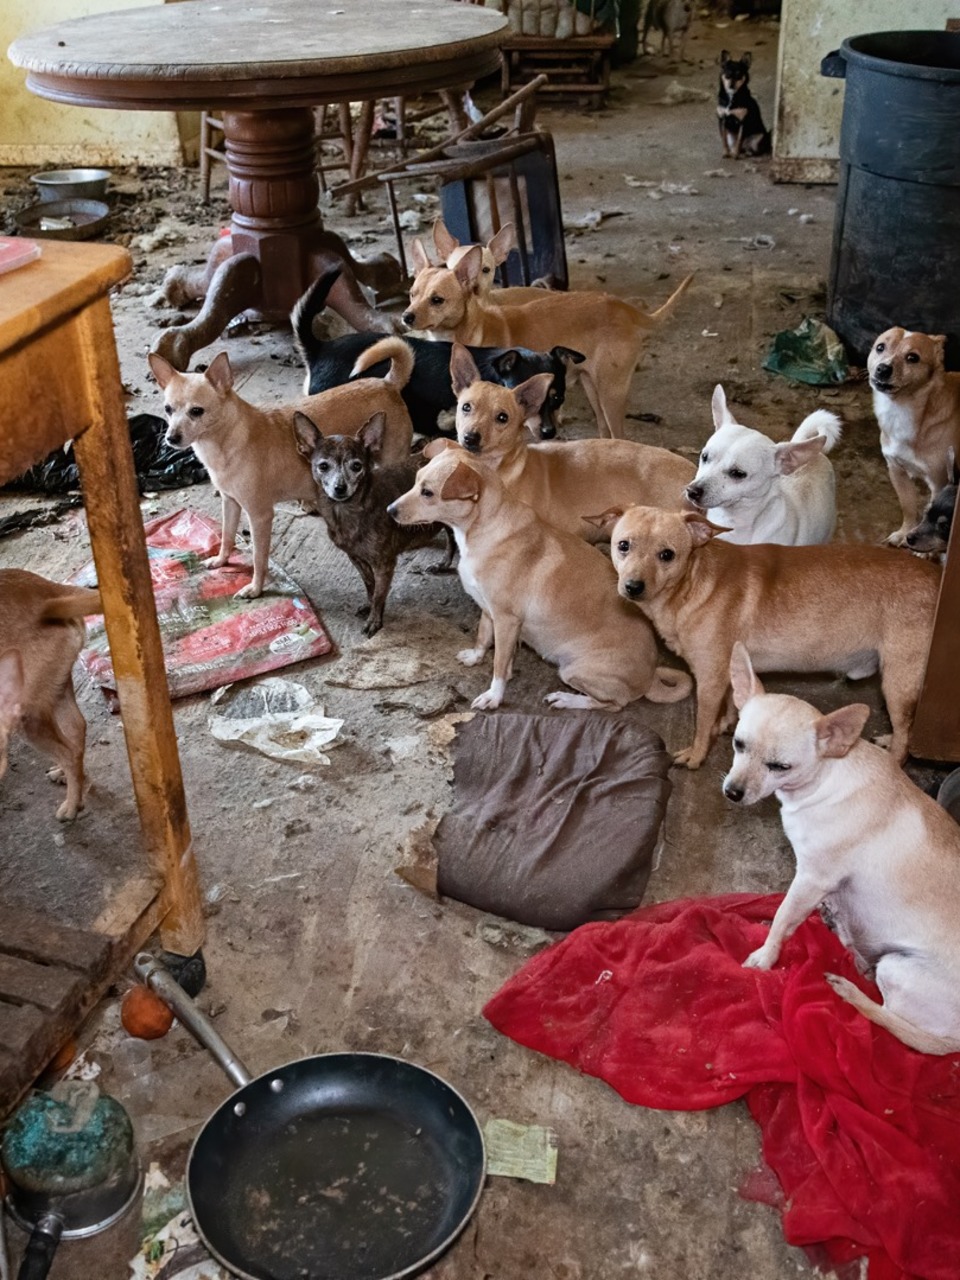 Nearly 50 Abandoned Dogs Rescued And At Least 10 Found Dead In